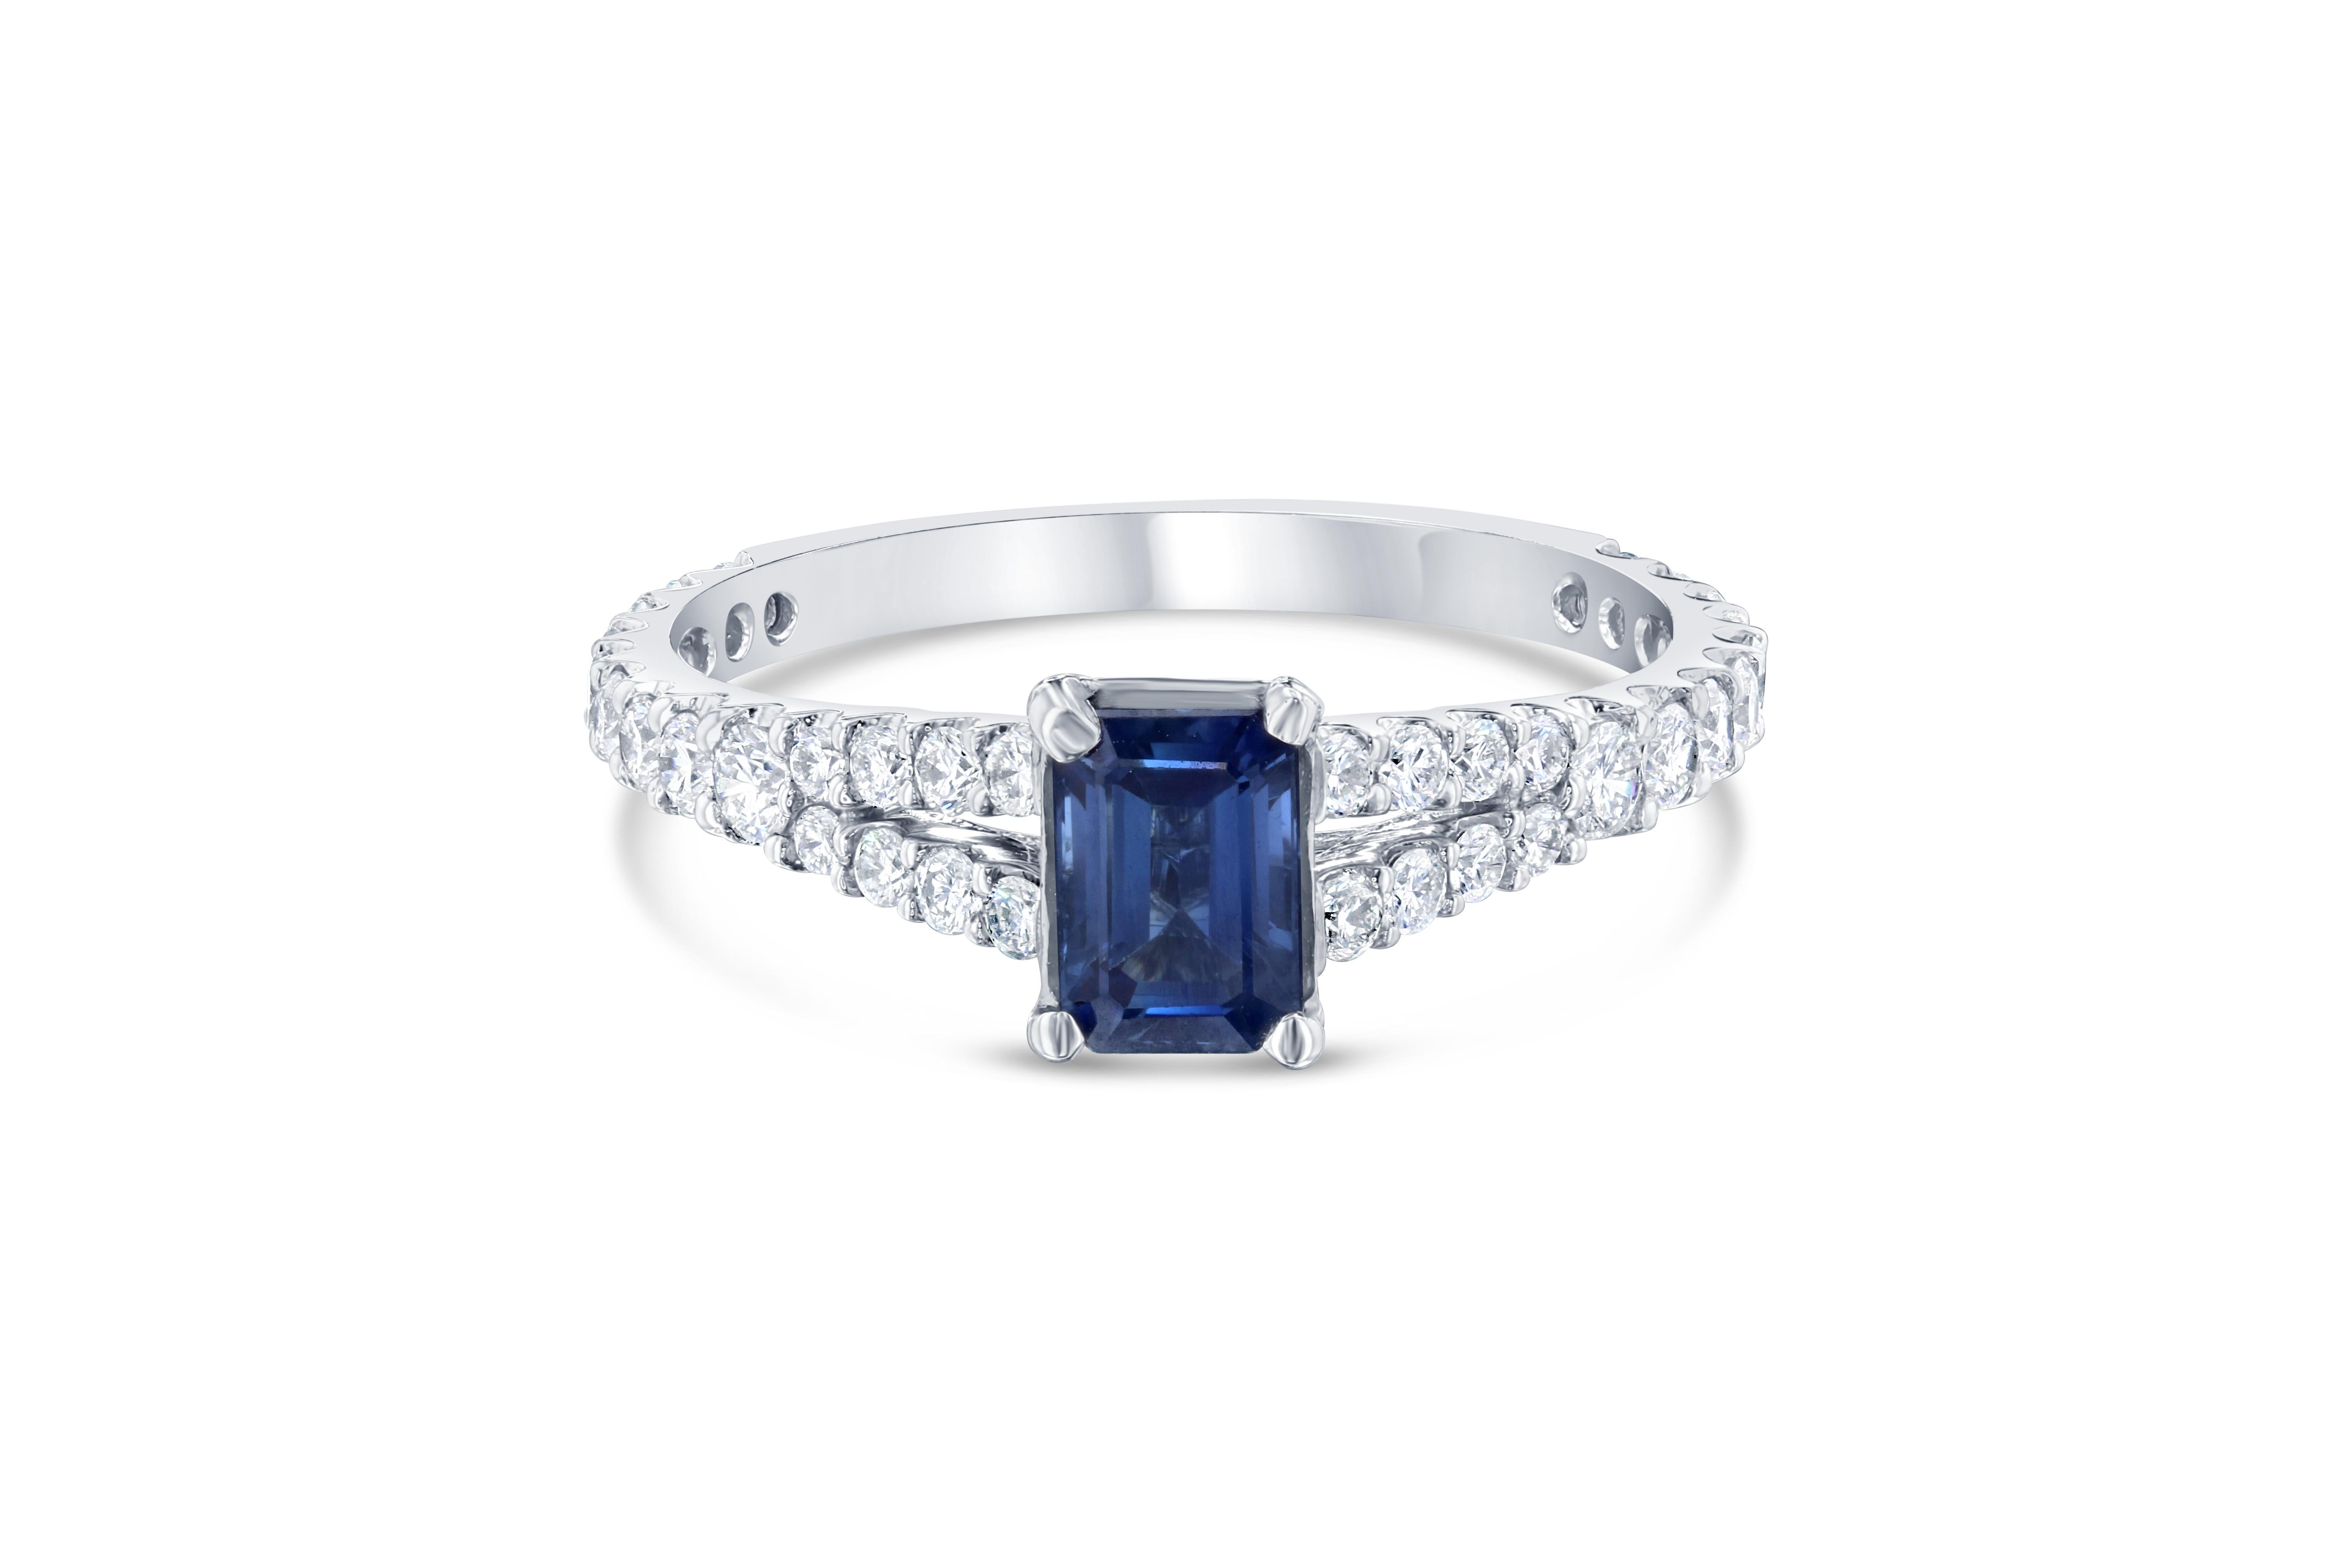 This delicate and dainty beauty has an Emerald Cut Blue Sapphire that weighs 0.79 Carats. It has 36 Round Cut Diamonds that weigh 0.56 Carats. The clarity and color of the diamonds are VS-H. The Emerald Cut Sapphire measures at 6 mm x 4 mm. 

It is